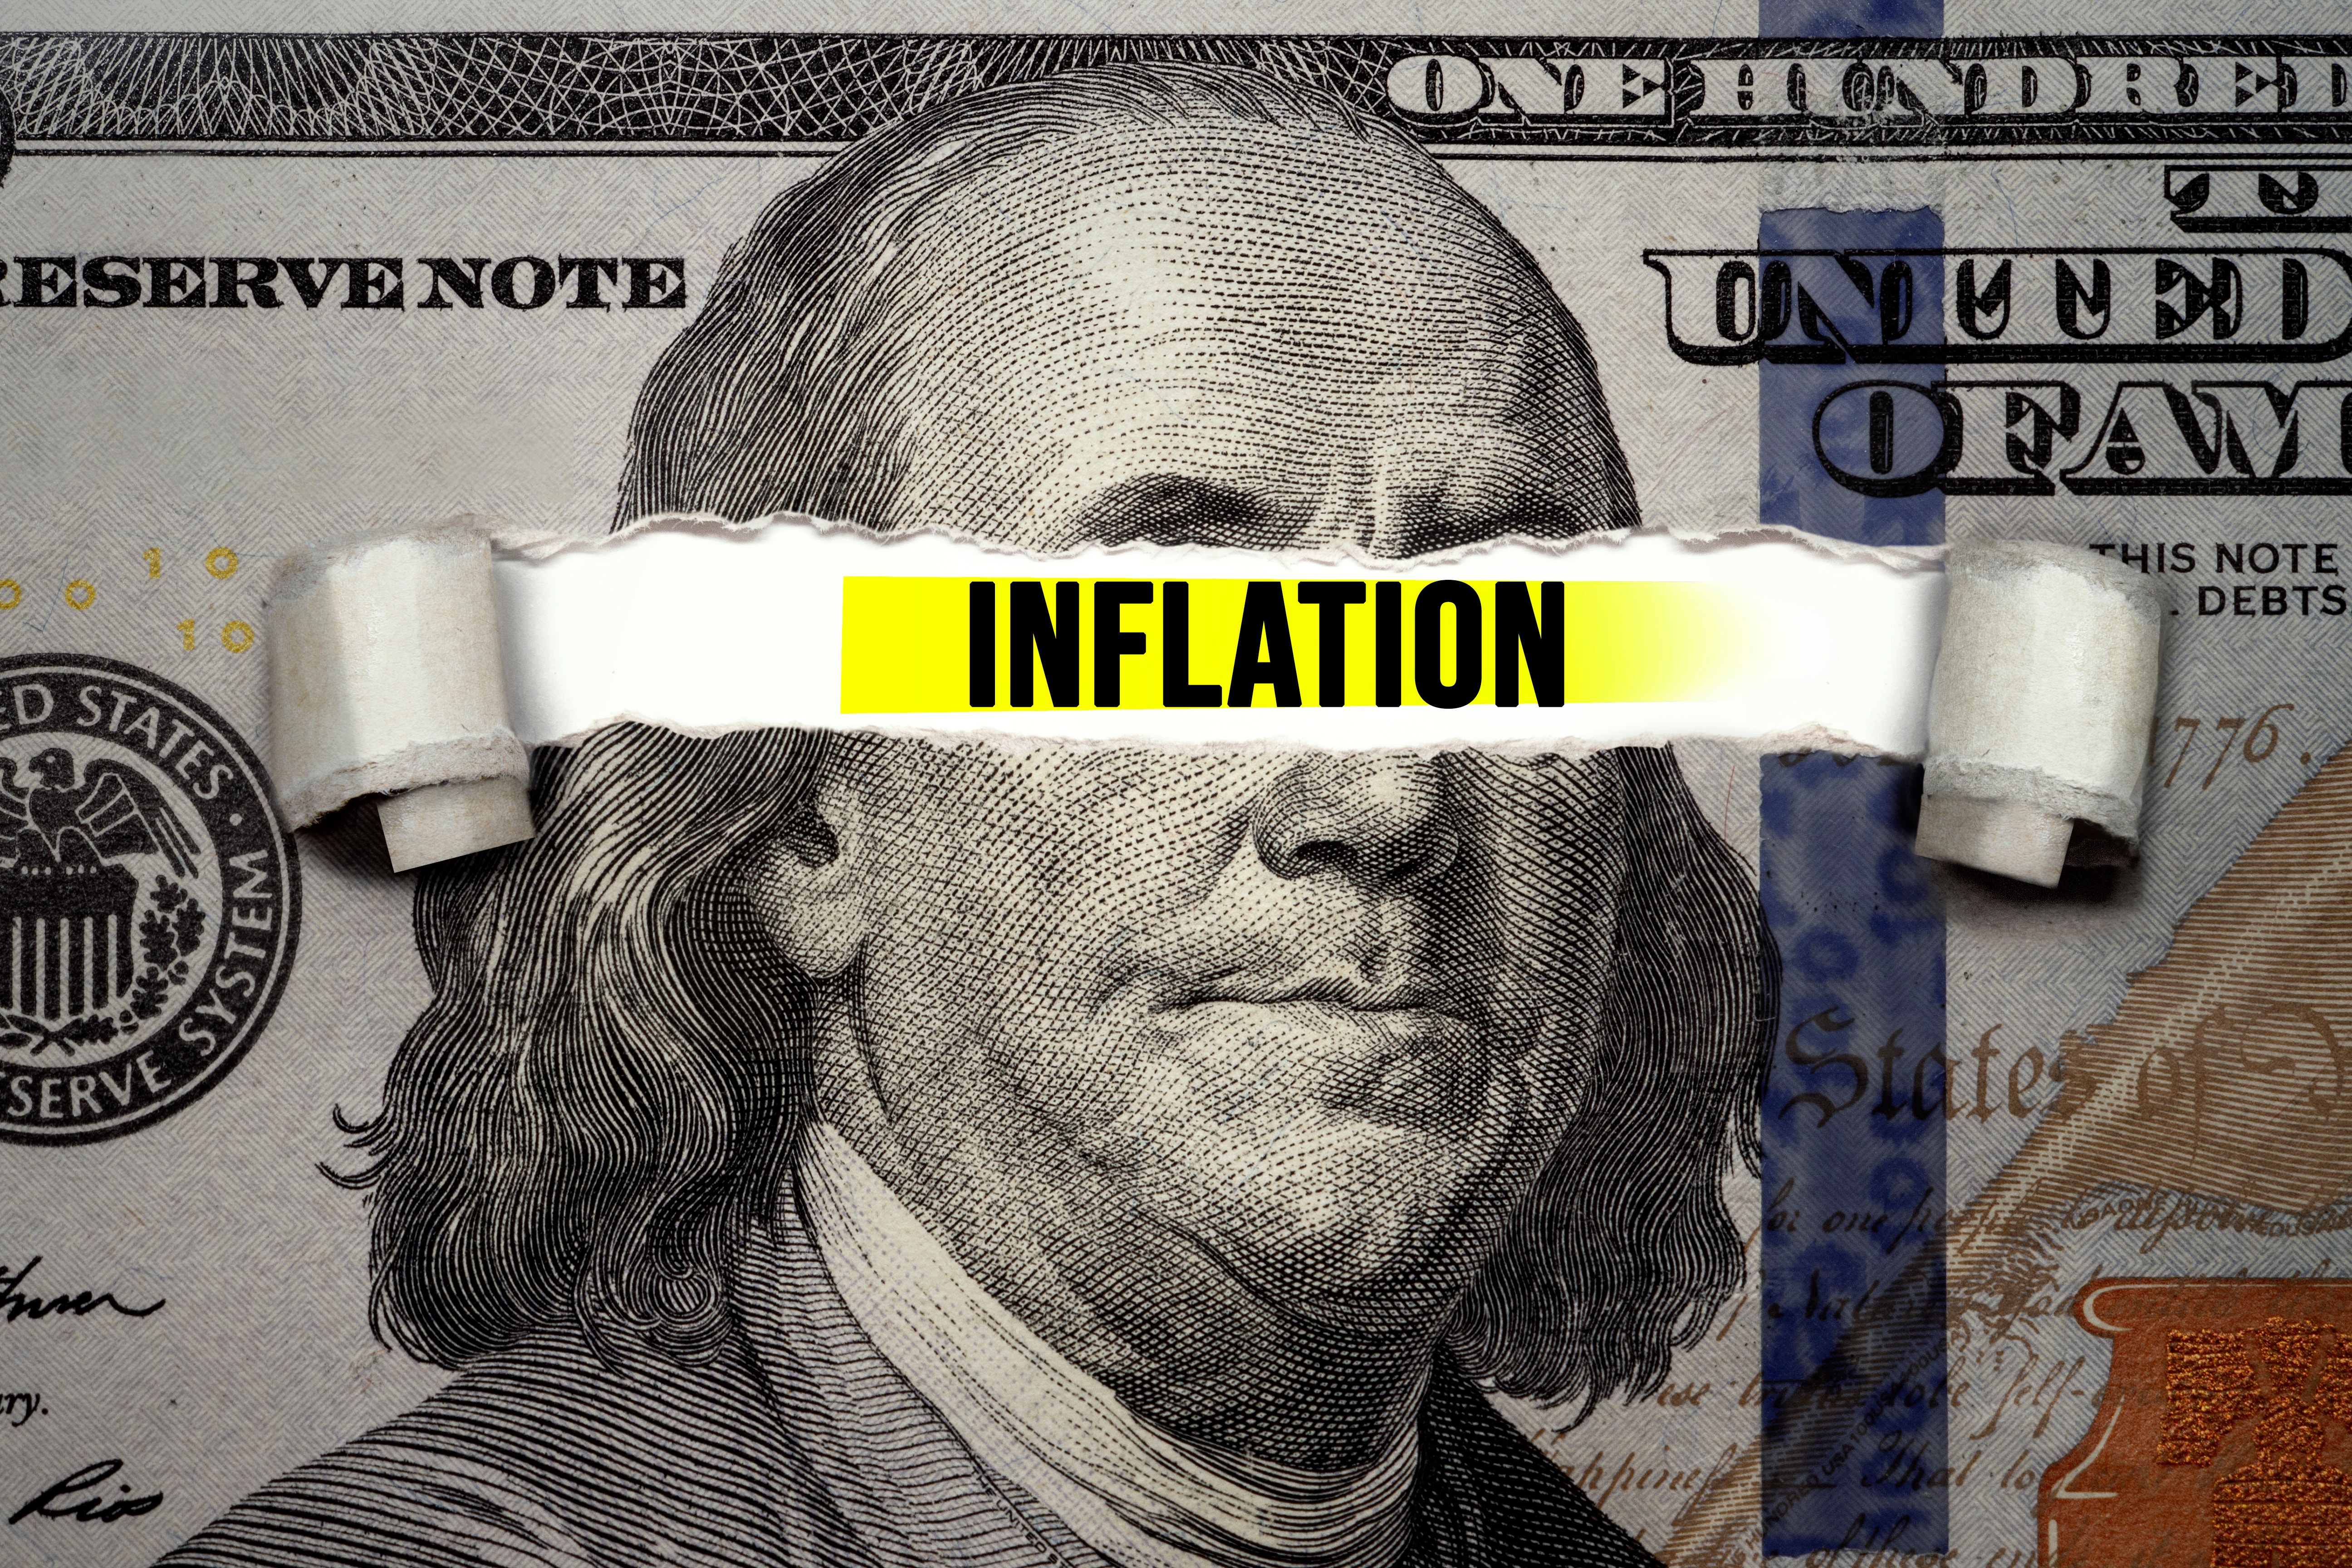 Investors Still Looking Cautious Ahead Of Wednesday's Big Inflation Report